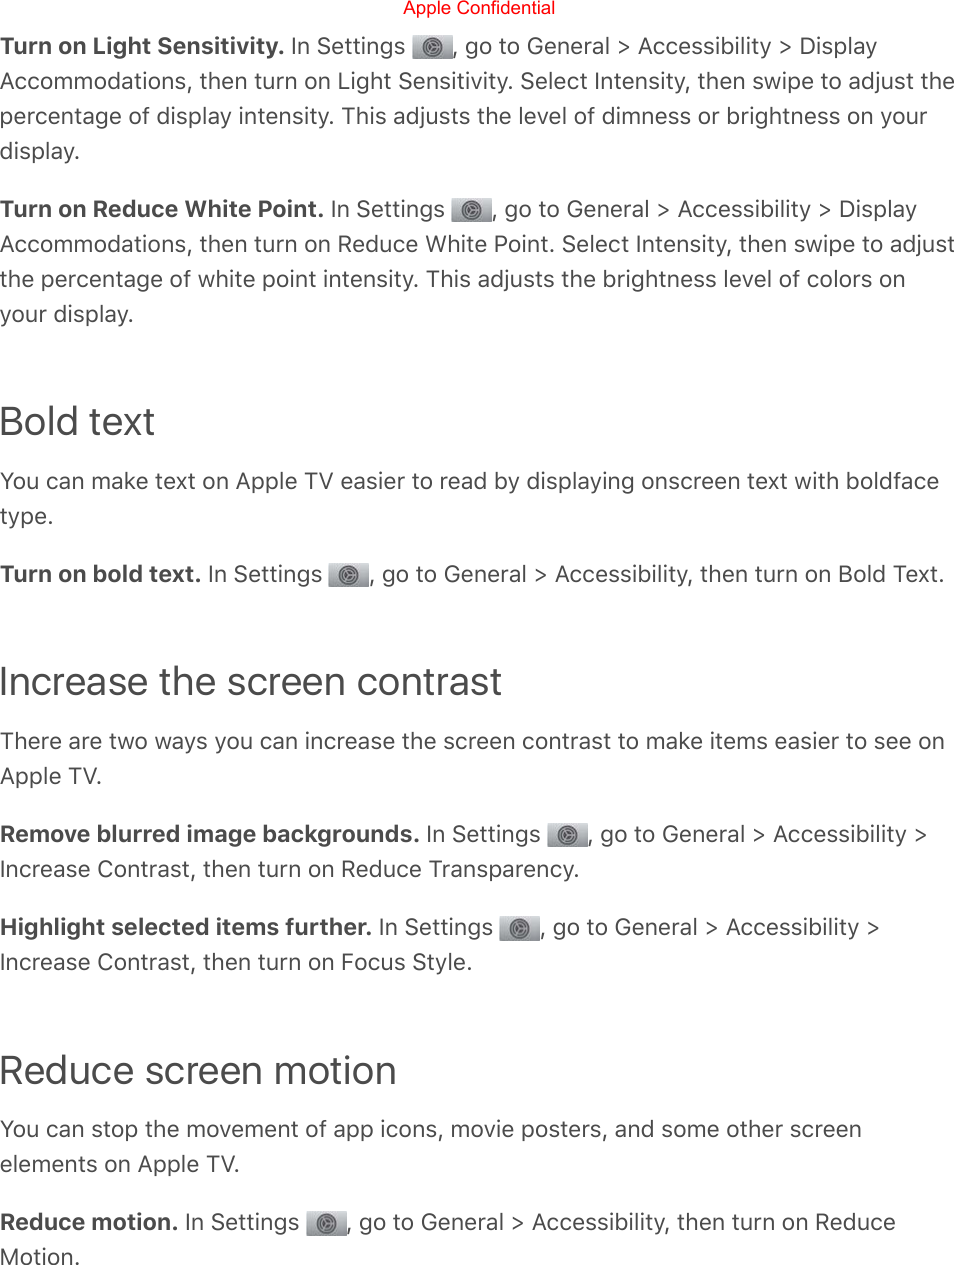 Turn on Light Sensitivity. In Settings  , go to General &gt; Accessibility &gt; DisplayAccommodations, then turn on Light Sensitivity. Select Intensity, then swipe to adjust thepercentage of display intensity. This adjusts the level of dimness or brightness on yourdisplay.Turn on Reduce White Point. In Settings  , go to General &gt; Accessibility &gt; DisplayAccommodations, then turn on Reduce White Point. Select Intensity, then swipe to adjustthe percentage of white point intensity. This adjusts the brightness level of colors onyour display.Bold textYou can make text on Apple TV easier to read by displaying onscreen text with boldfacetype.Turn on bold text. In Settings  , go to General &gt; Accessibility, then turn on Bold Text.Increase the screen contrastThere are two ways you can increase the screen contrast to make items easier to see onApple TV.Remove blurred image backgrounds. In Settings  , go to General &gt; Accessibility &gt;Increase Contrast, then turn on Reduce Transparency.Highlight selected items further. In Settings  , go to General &gt; Accessibility &gt;Increase Contrast, then turn on Focus Style.Reduce screen motionYou can stop the movement of app icons, movie posters, and some other screenelements on Apple TV.Reduce motion. In Settings  , go to General &gt; Accessibility, then turn on ReduceMotion.Apple Confidential